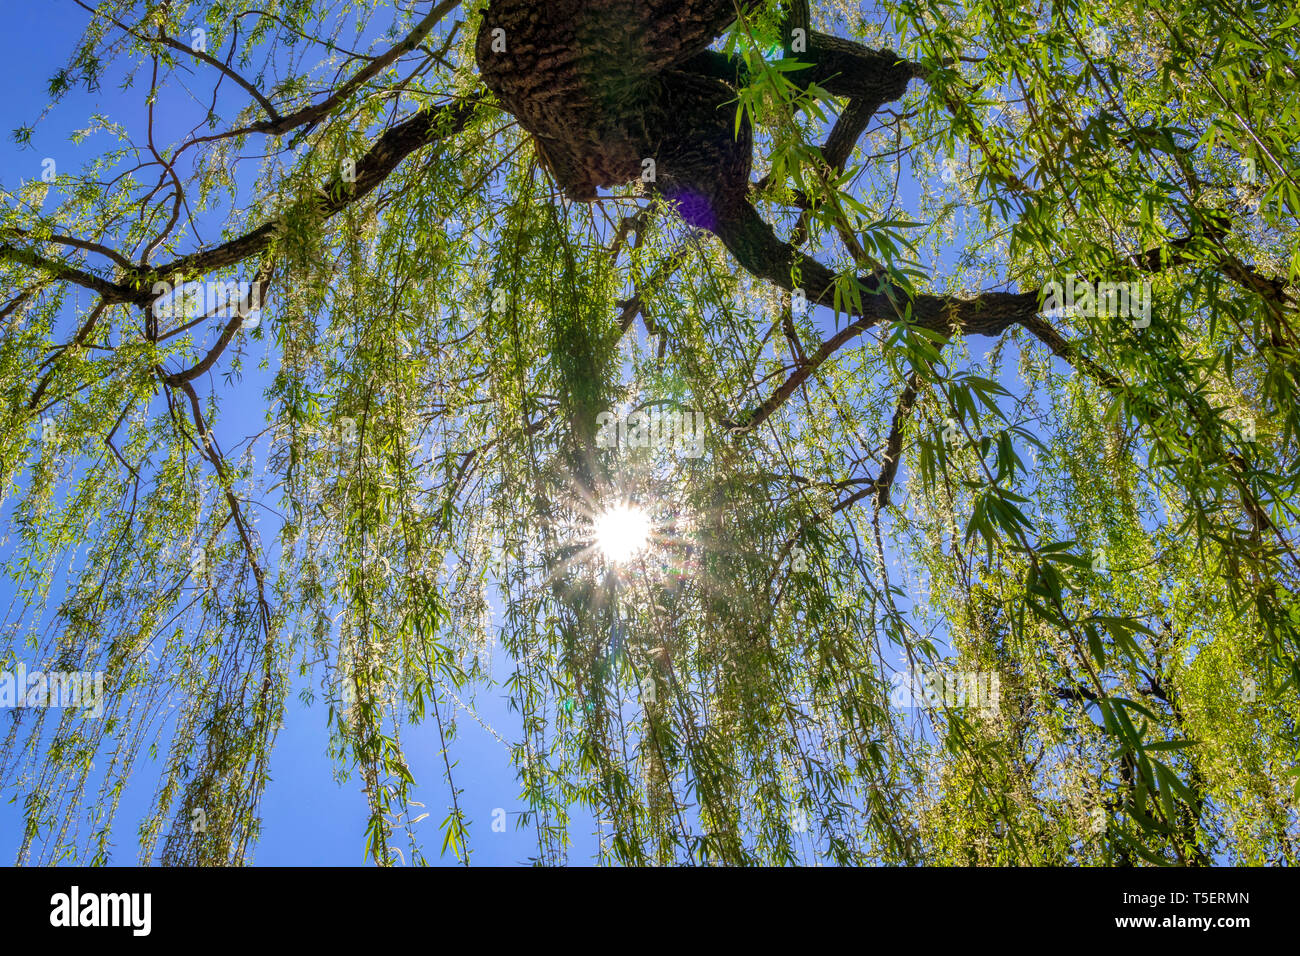 Weeping Willow (Salix babylonica), pendulous branchlets in spring, Weilheim, Bavaria, Germany, Europe Stock Photo